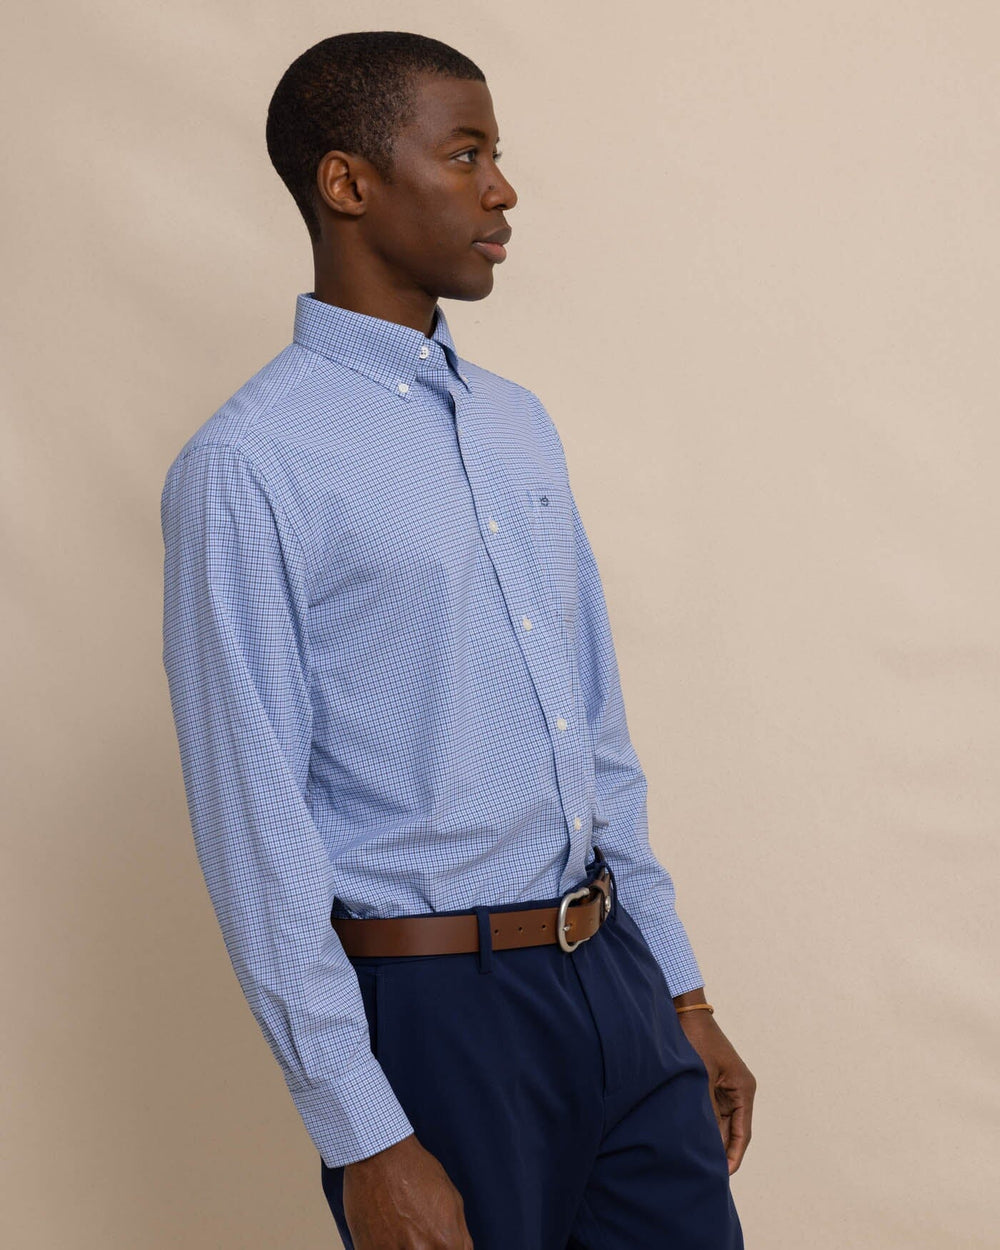 The front view of the Southern Tide Bowry brrr°® Intercoastal Sport Shirt by Southern Tide - Seven Seas Blue